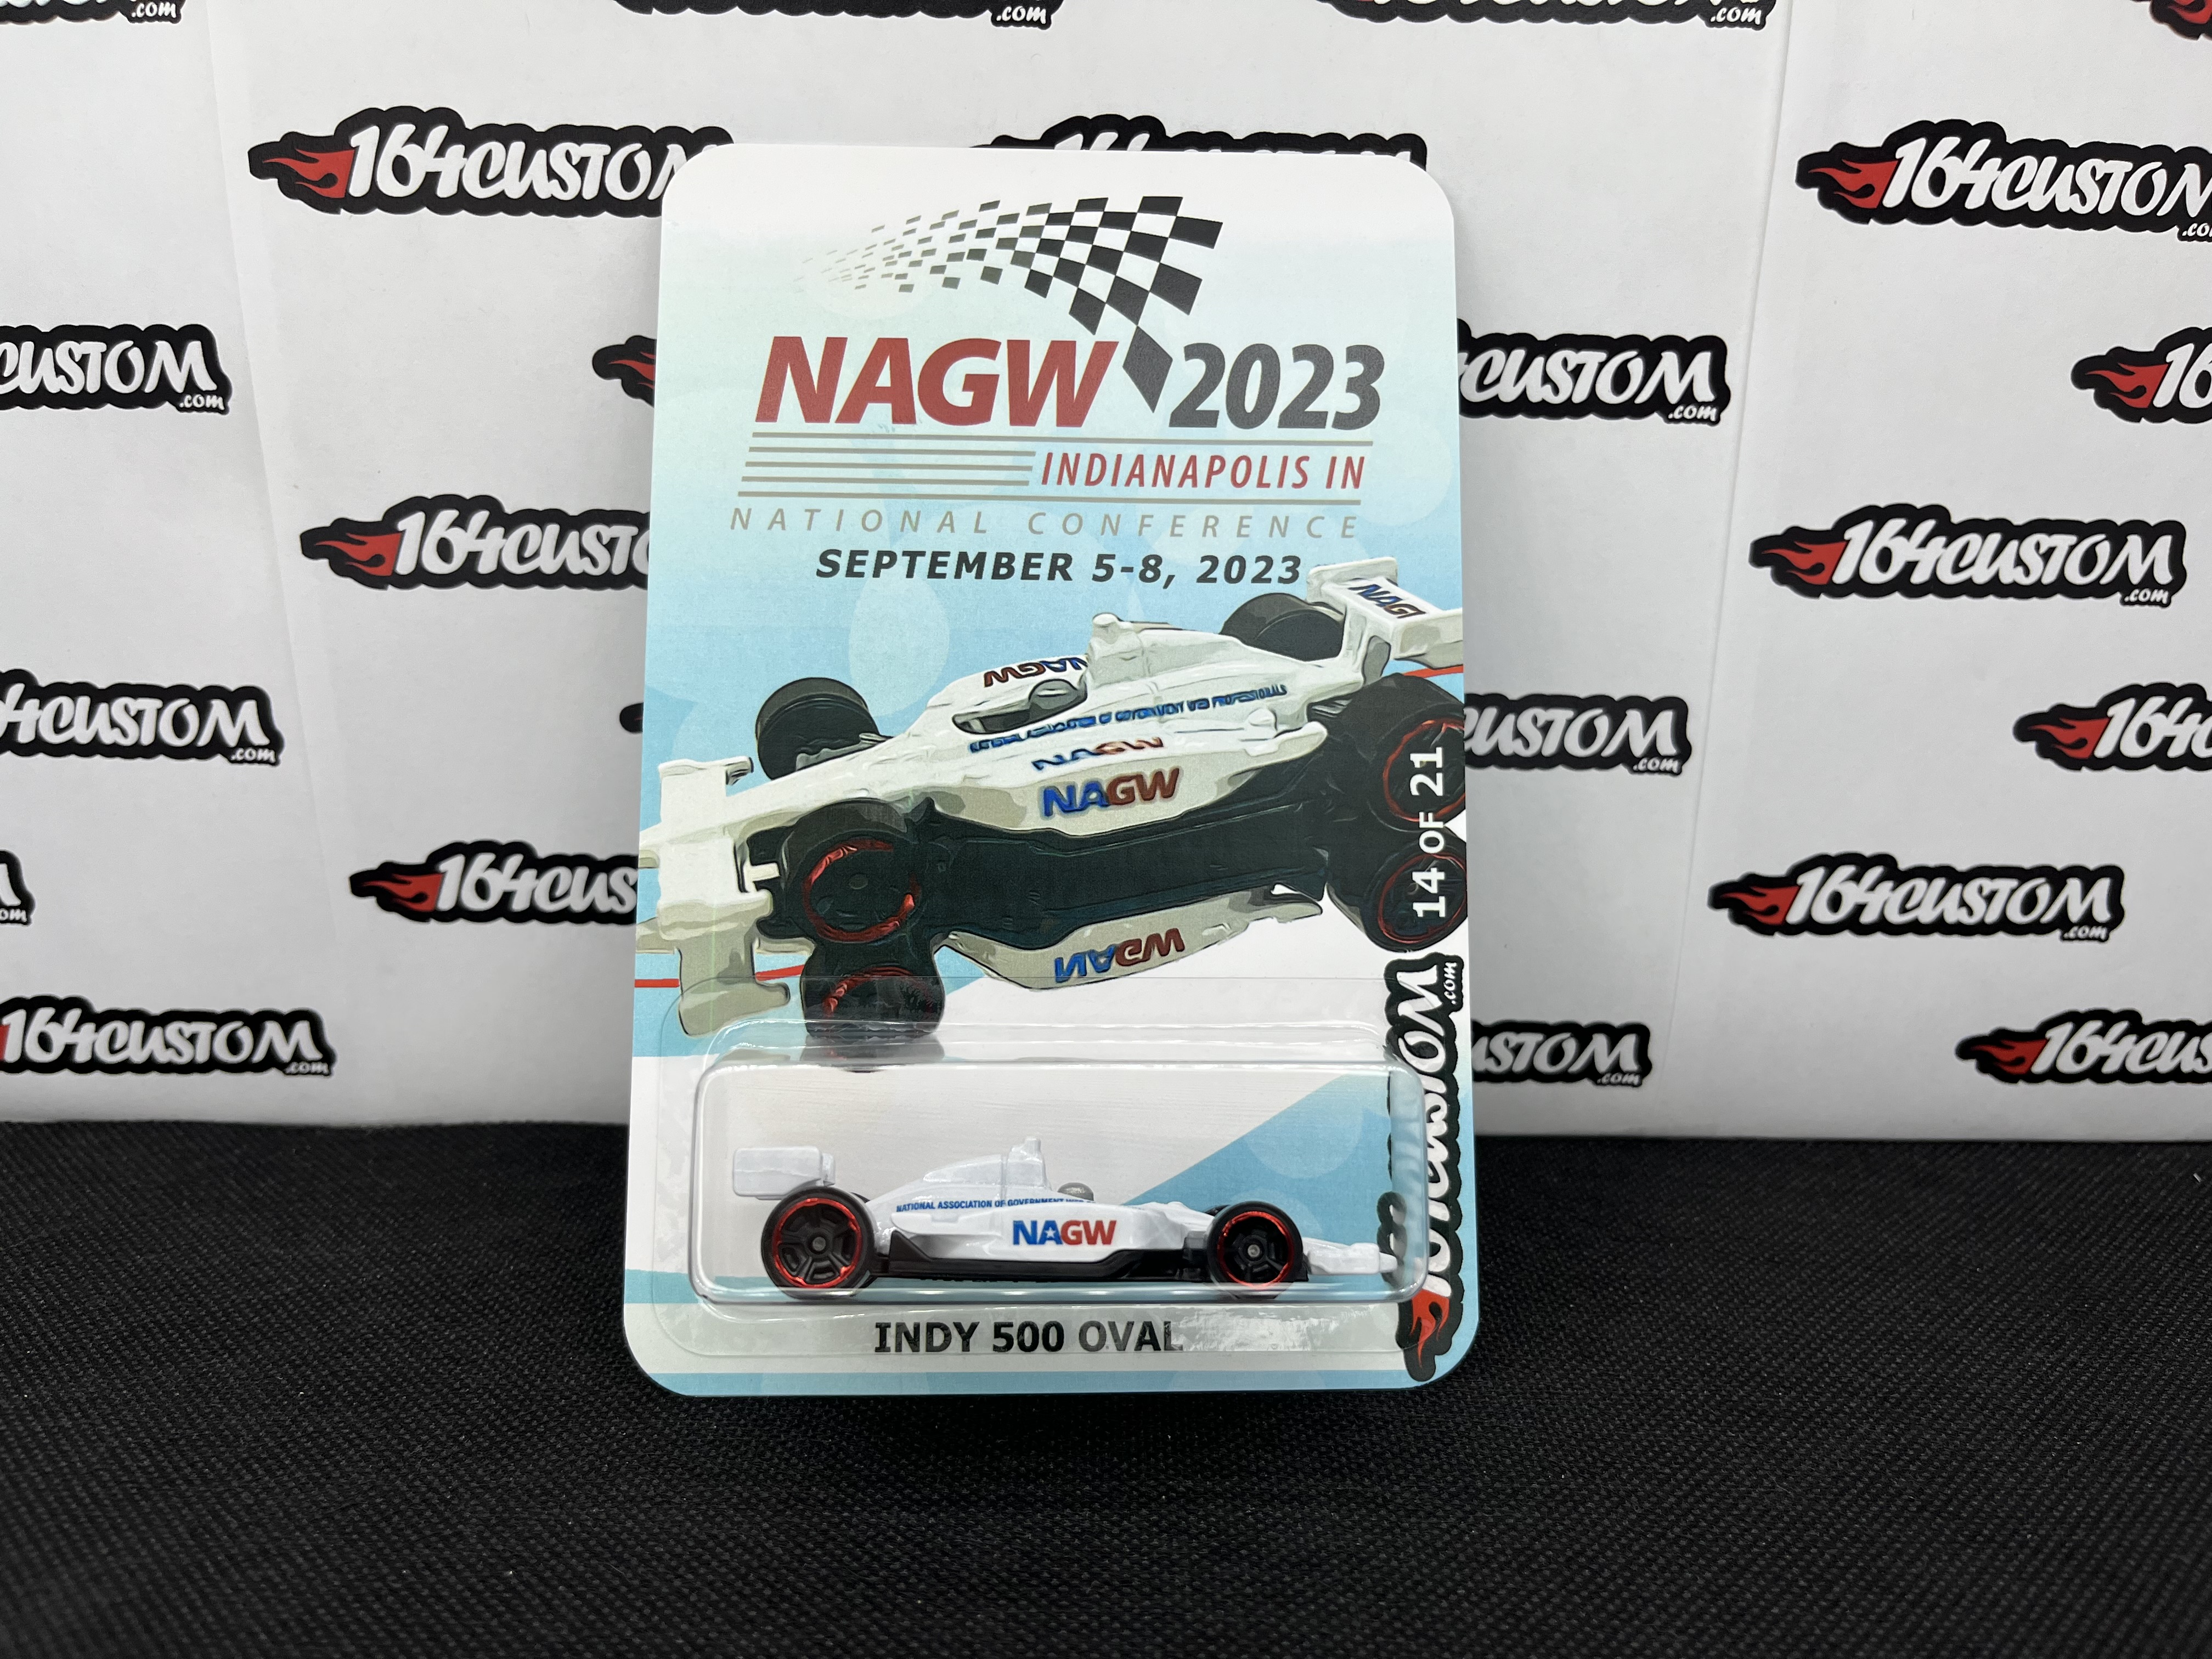 Indy 500 Oval - 14 of 21 Hot Wheels